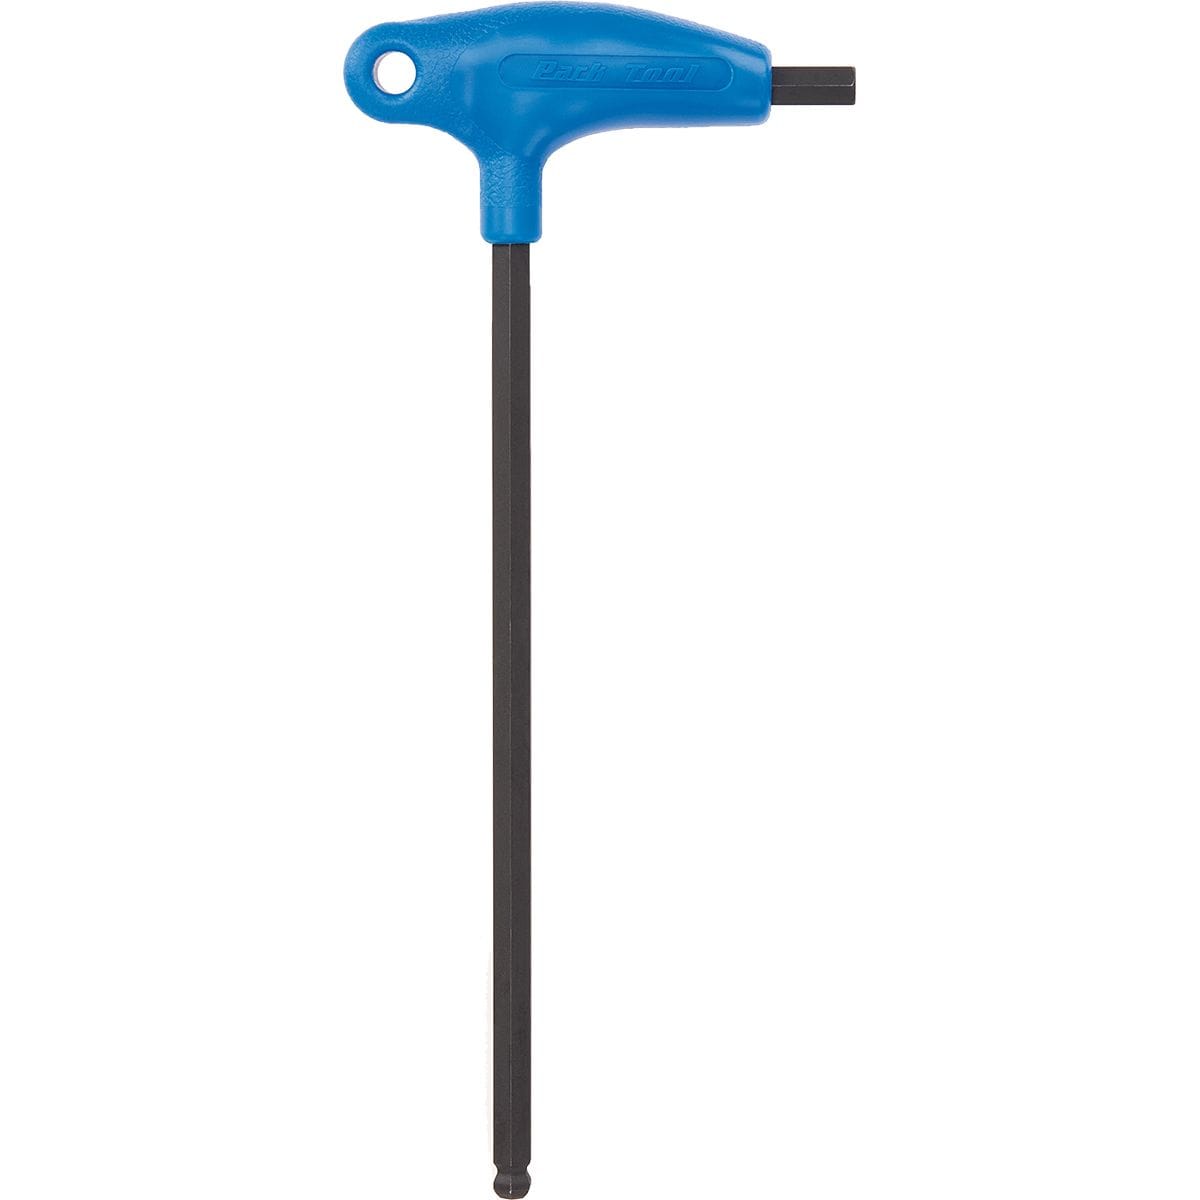 Park Tool PH-1.2 P-Handle Hex Wrench Set for sale online 